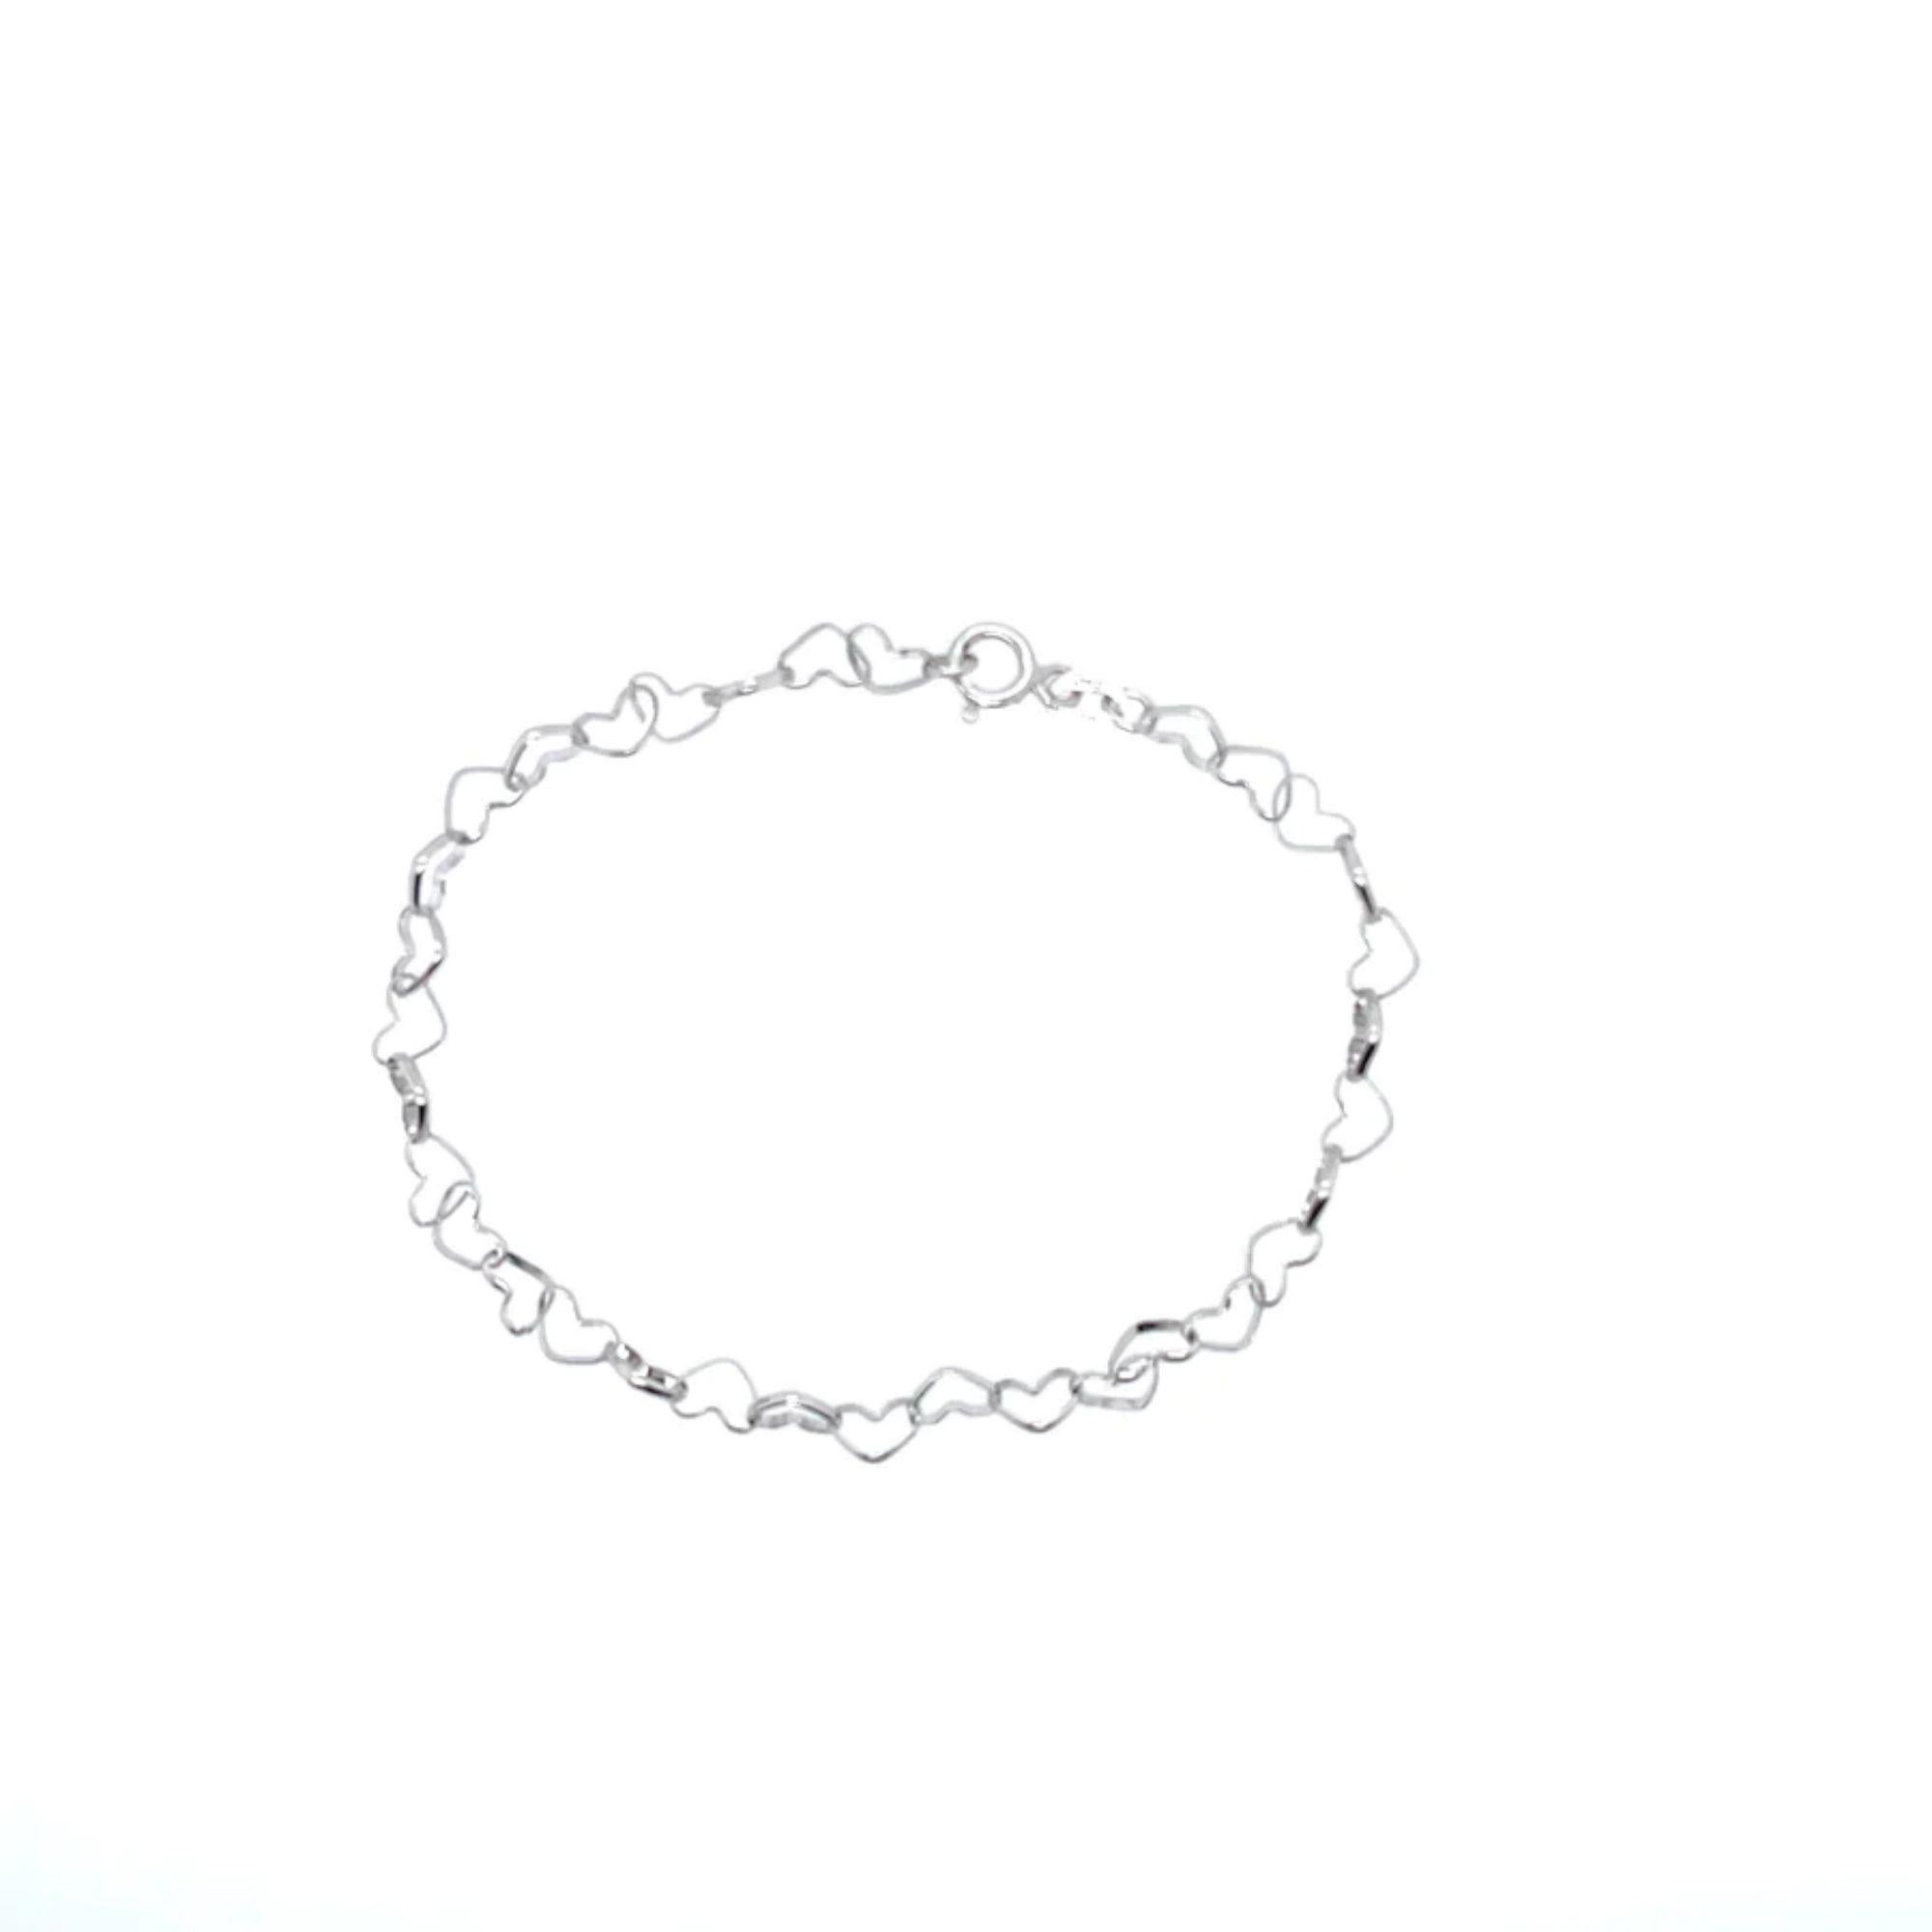 Perfect gift for your loved one or yourself, this chain of interconnected hearts is the definition of love. Comes in 14k white or yellow gold, this is a bracelet is beautiful on its own or layered. Goes perfect with the matching hearts chain